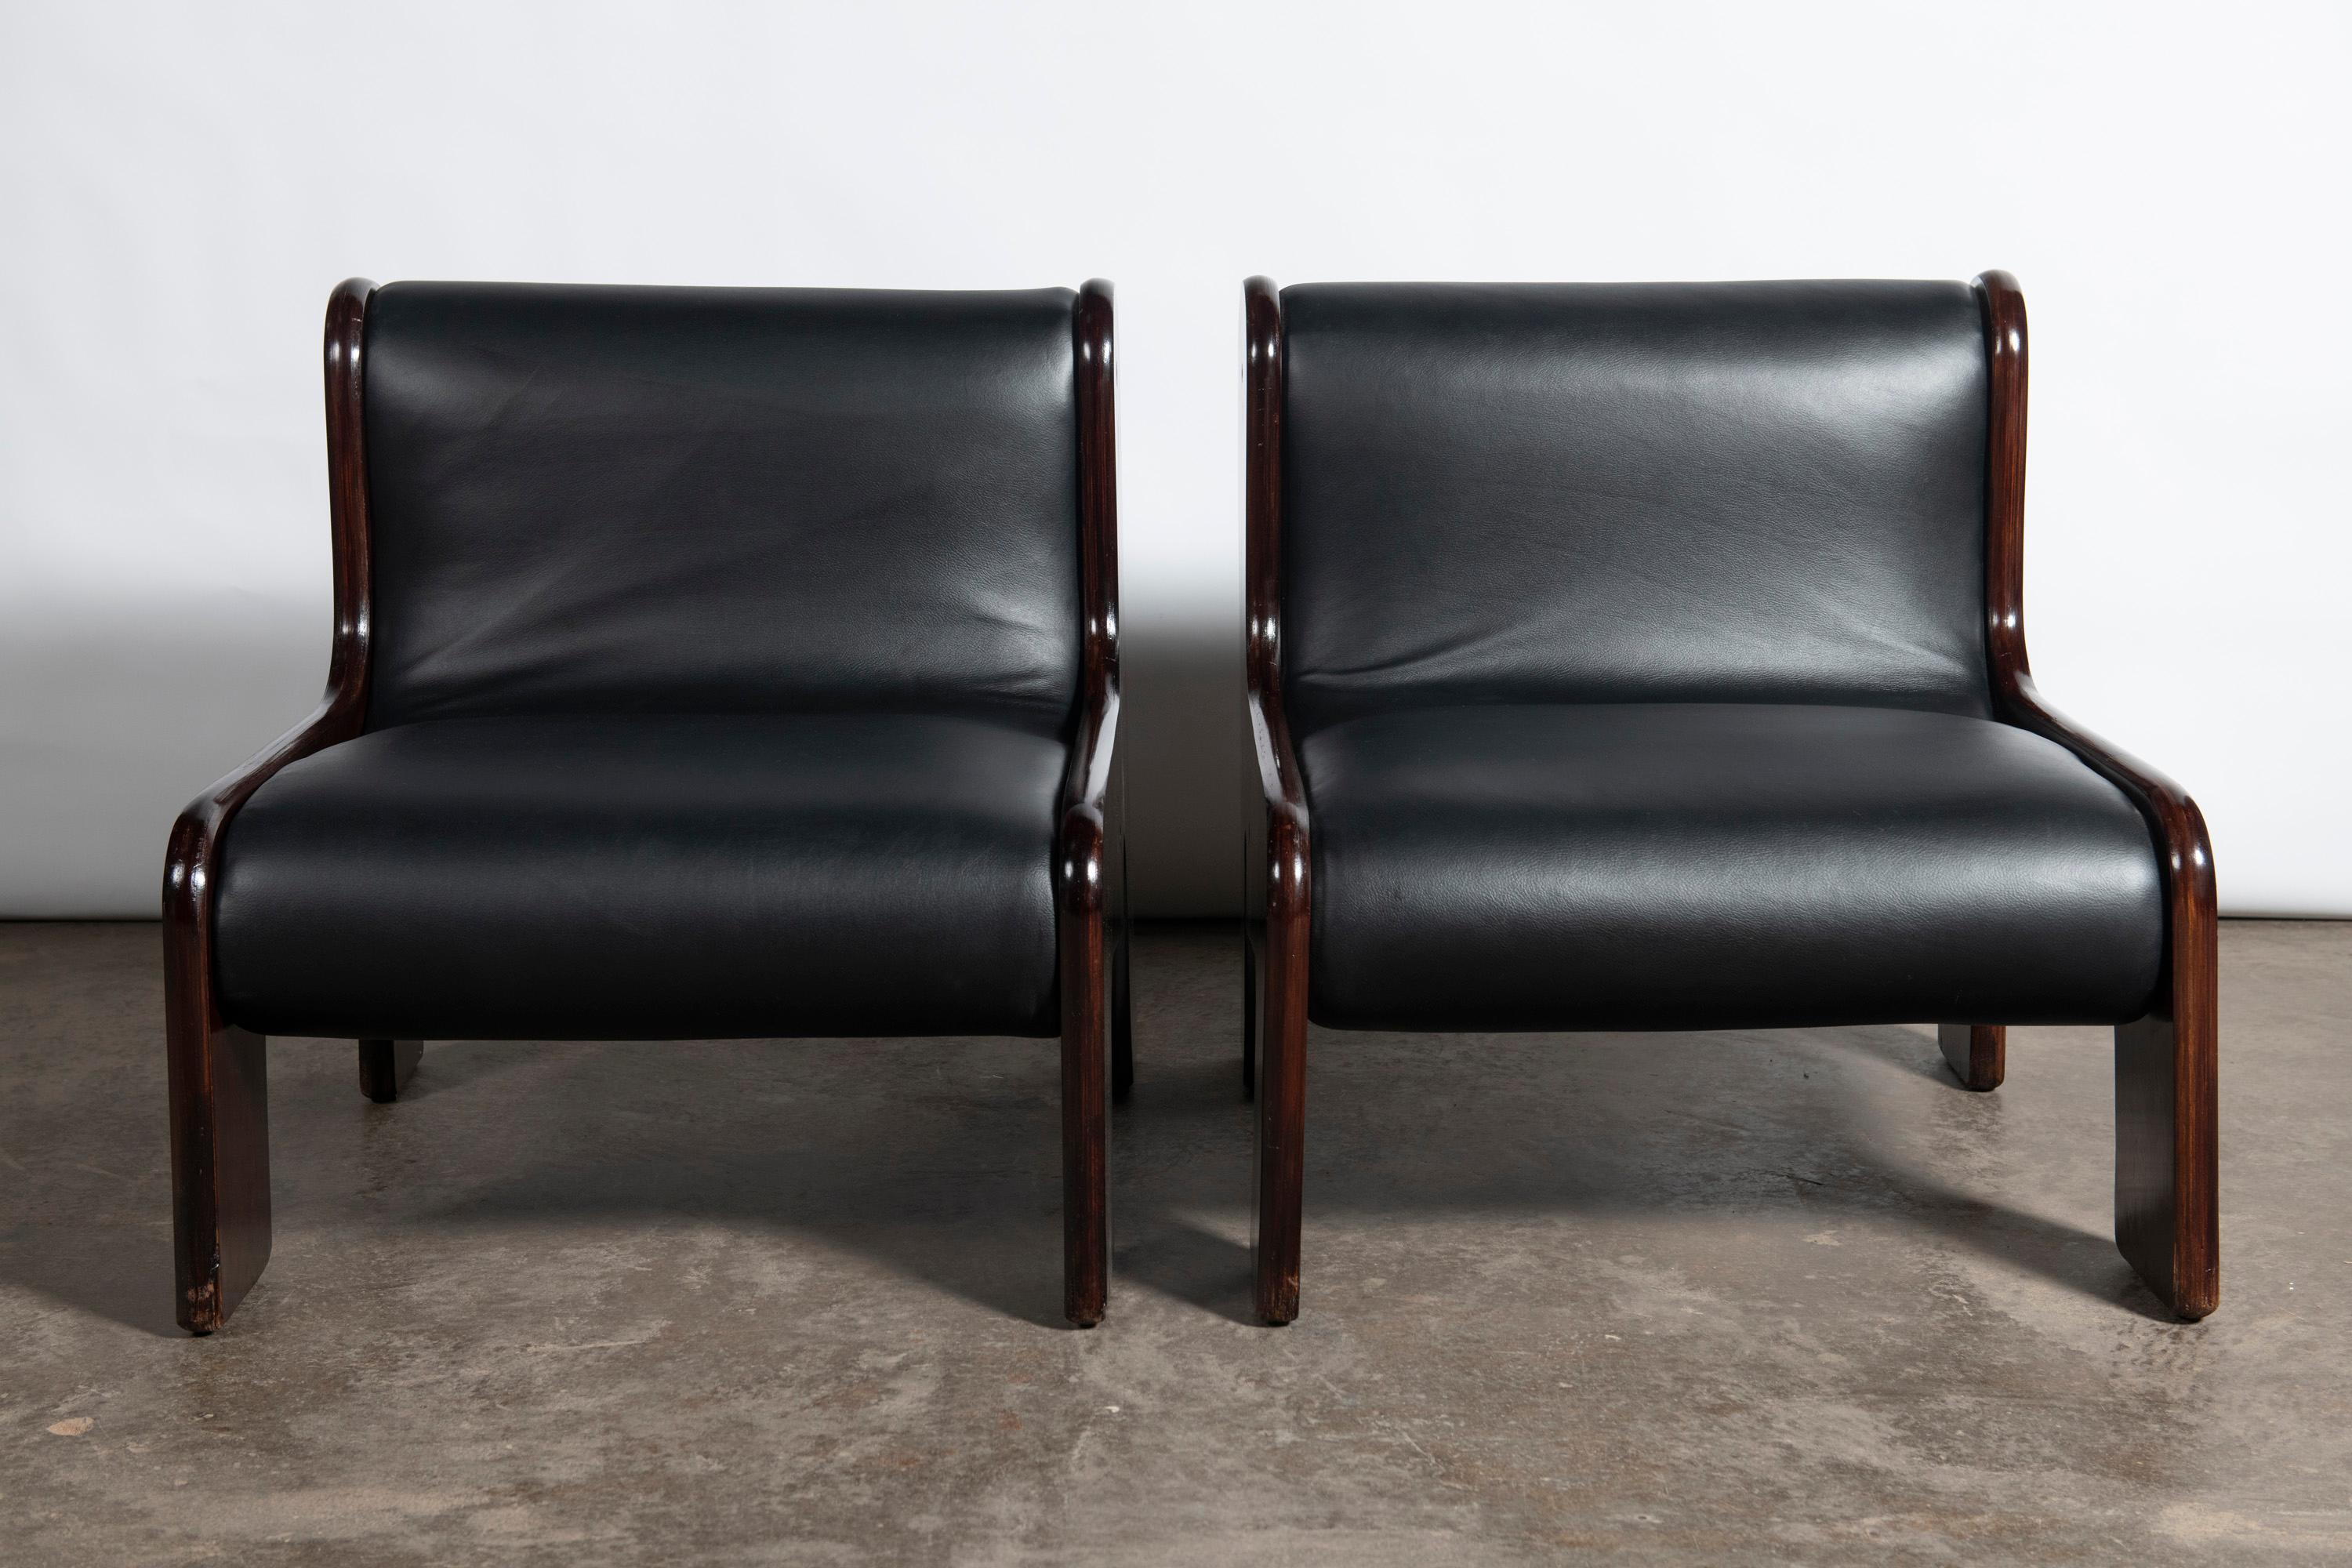 Argentine Wood and leather set of 3 LP sofas designed by Ricardo Blanco, Argentina, 1970. For Sale